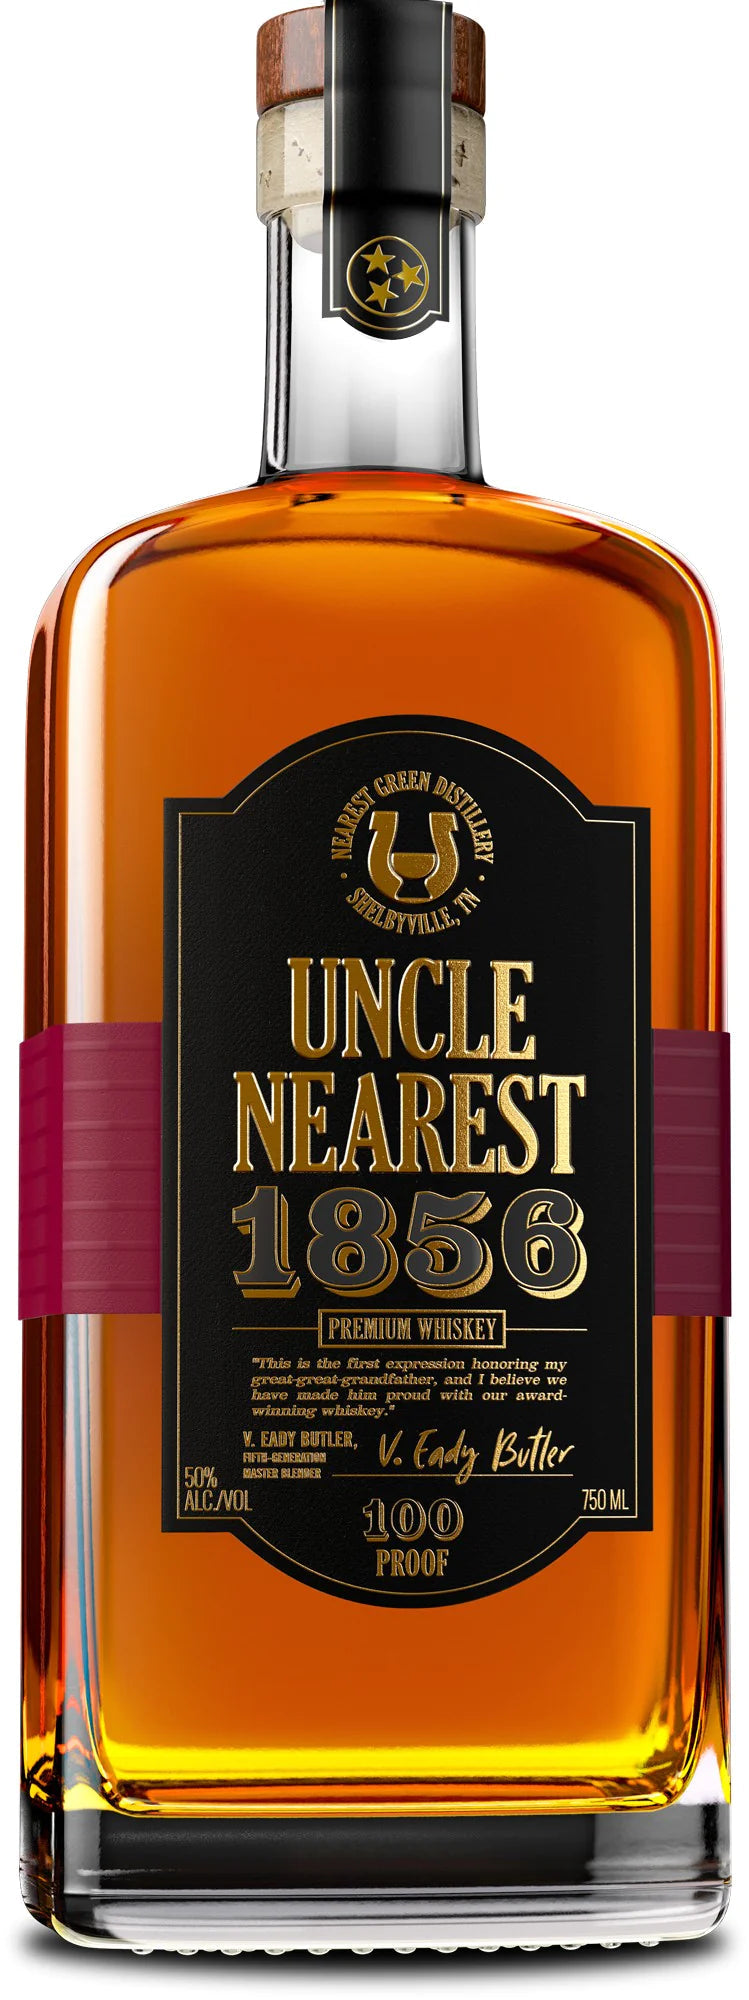 Uncle Nearest 1856 Premium Aged Whiskey .webp__PID:1d793708-bbd1-4cb0-9c72-fa8a3ab2f2e7